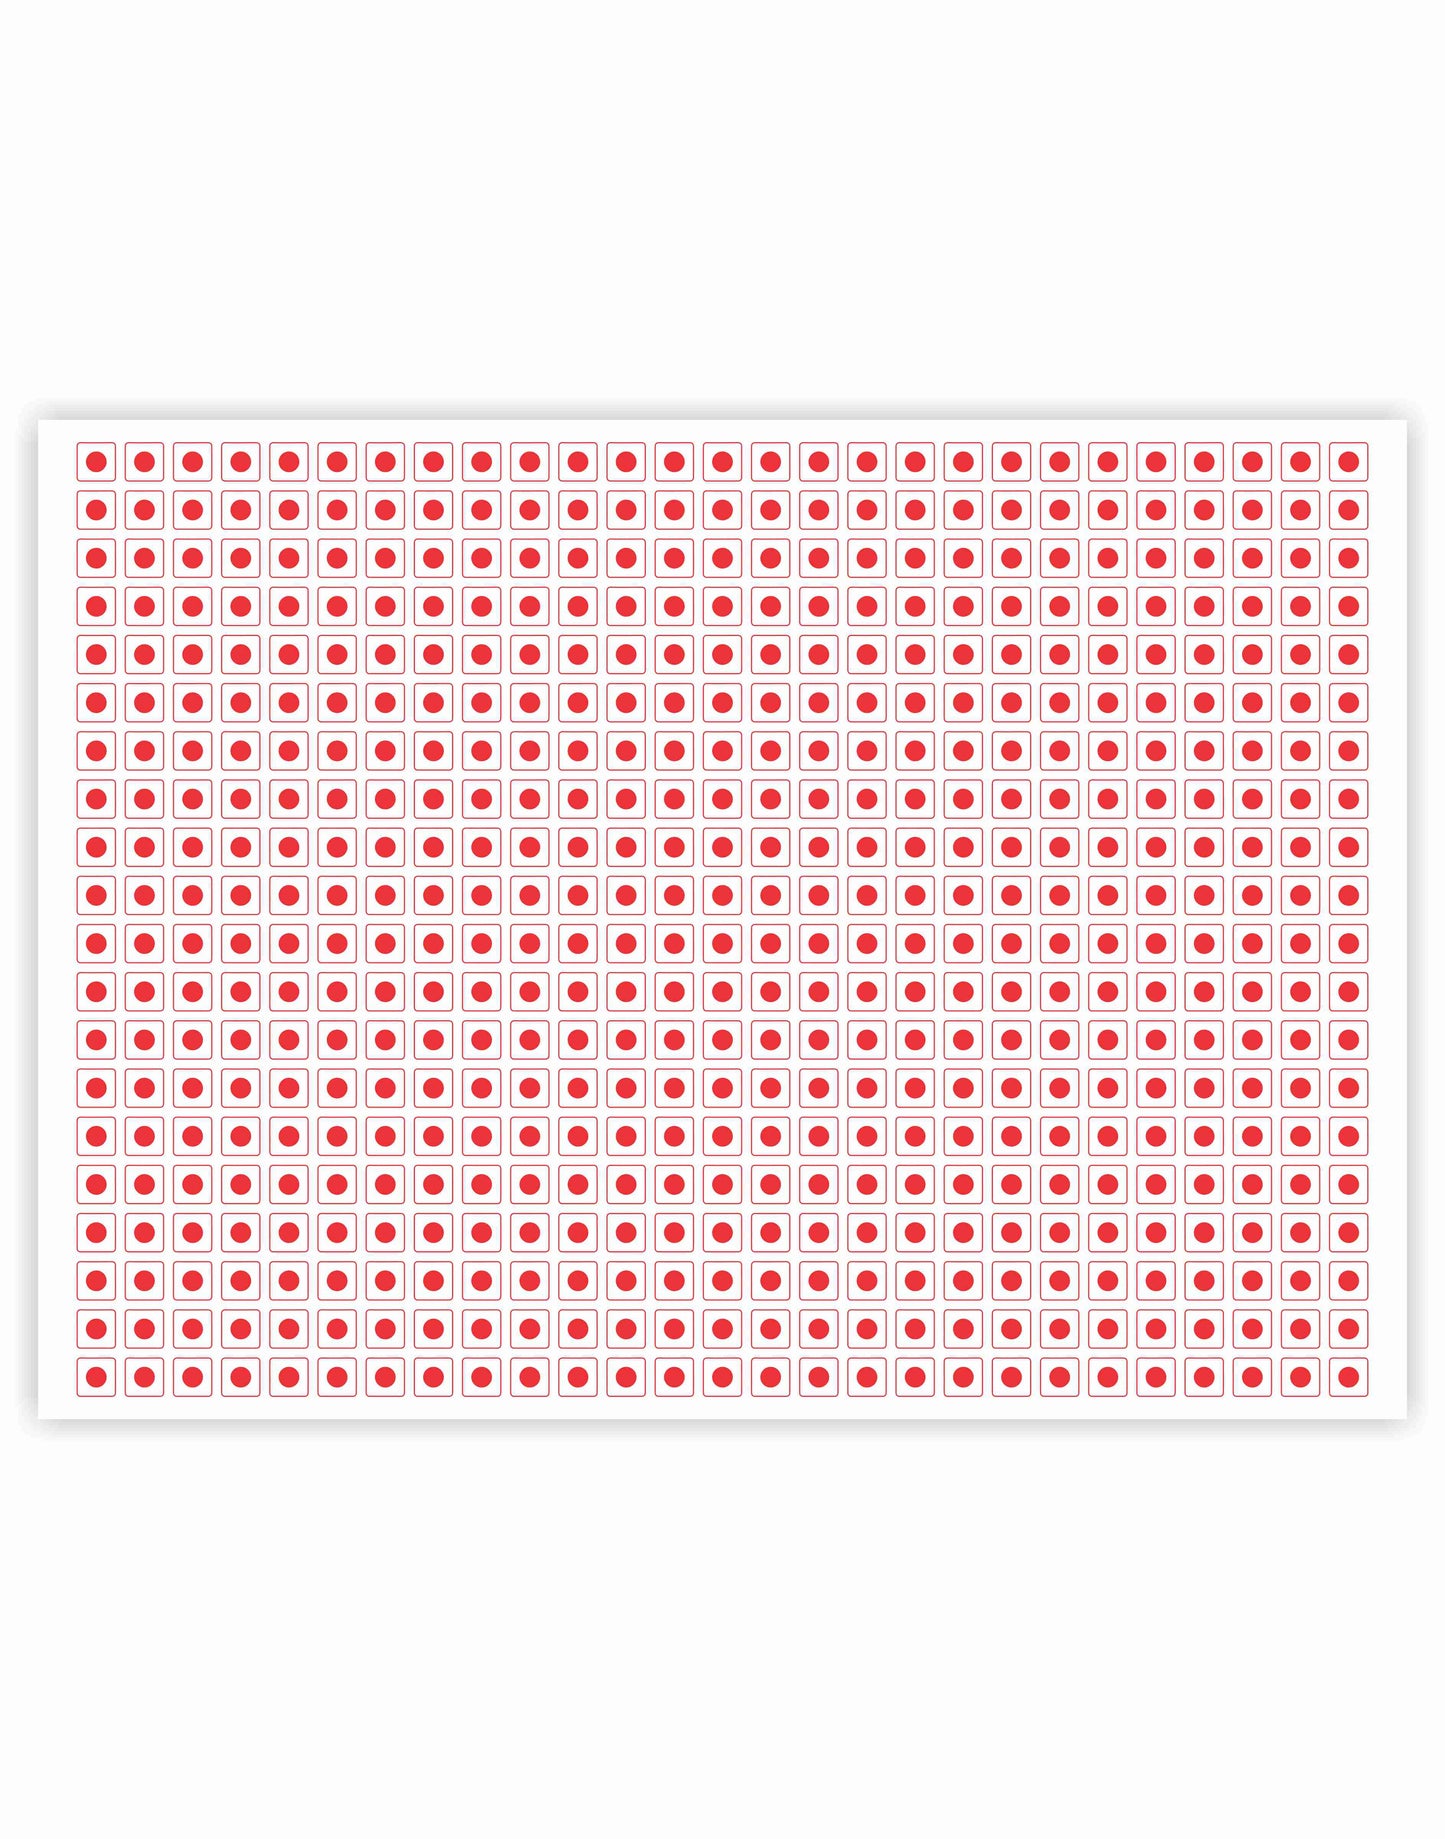 iberry's Self Adhensive 540 Non Veg Stickers Red for Food Packaging|Size 10 x 10 mm| Food Label Stickers